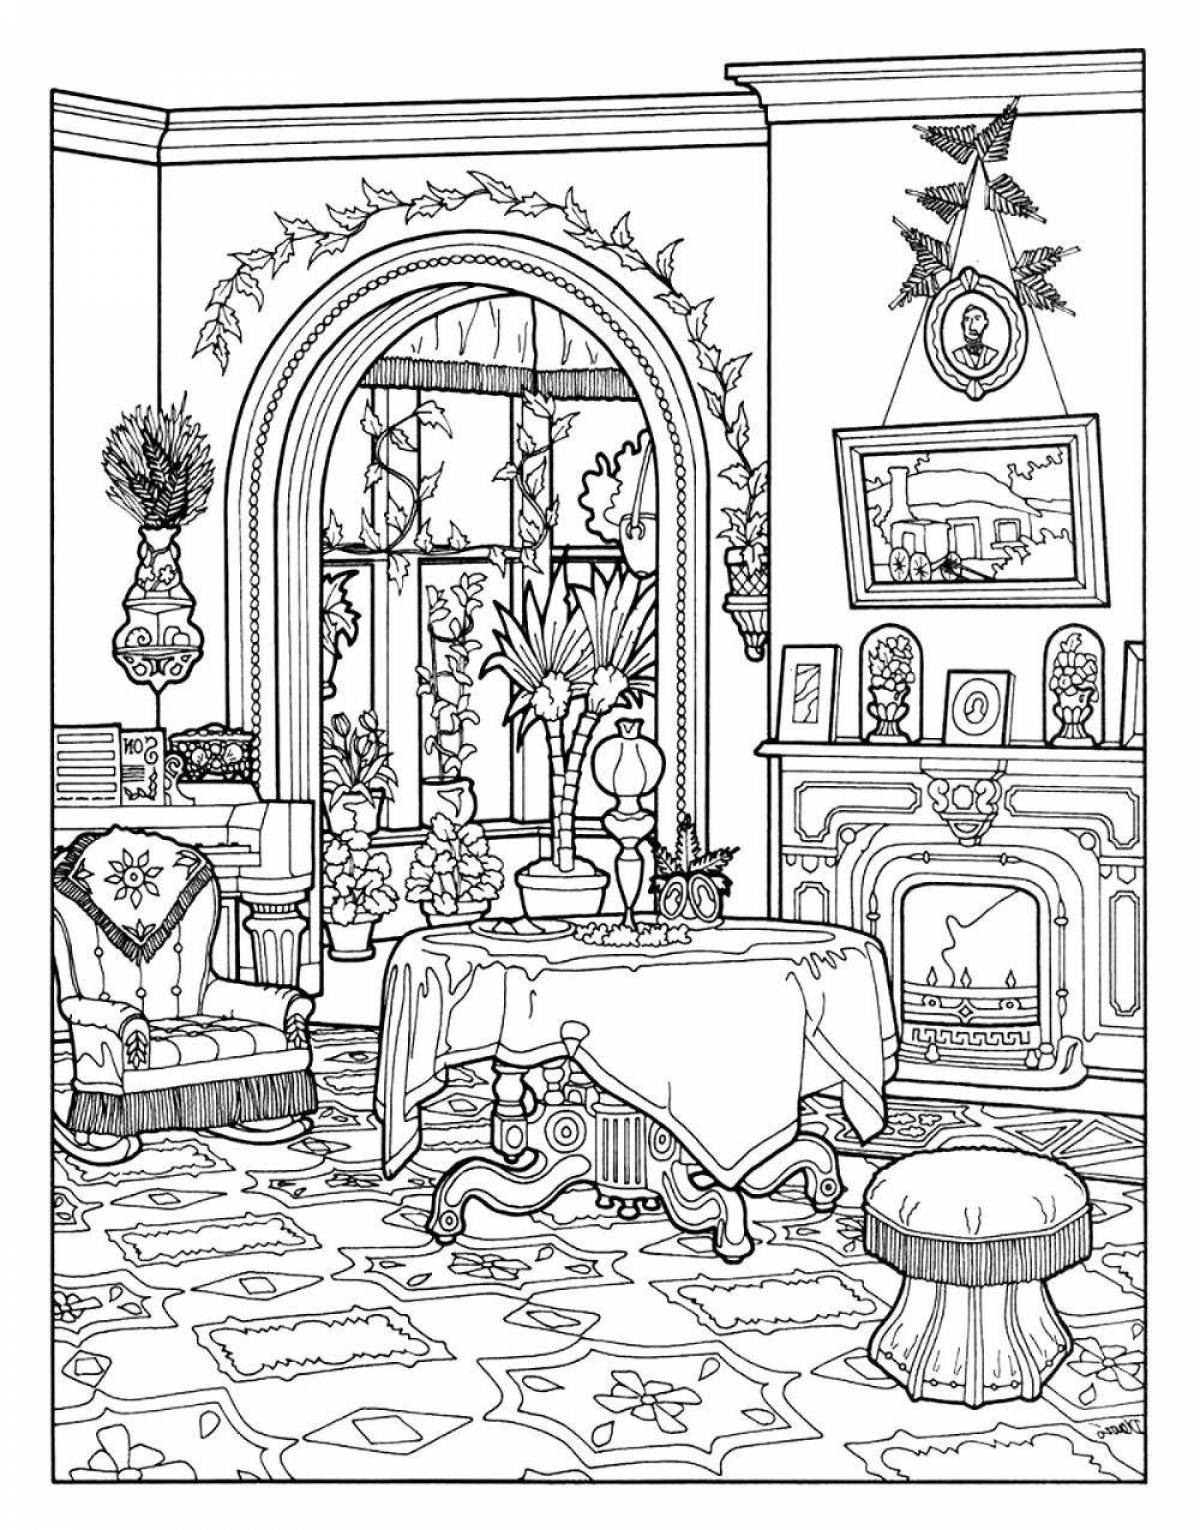 Coloring page sweet room eater